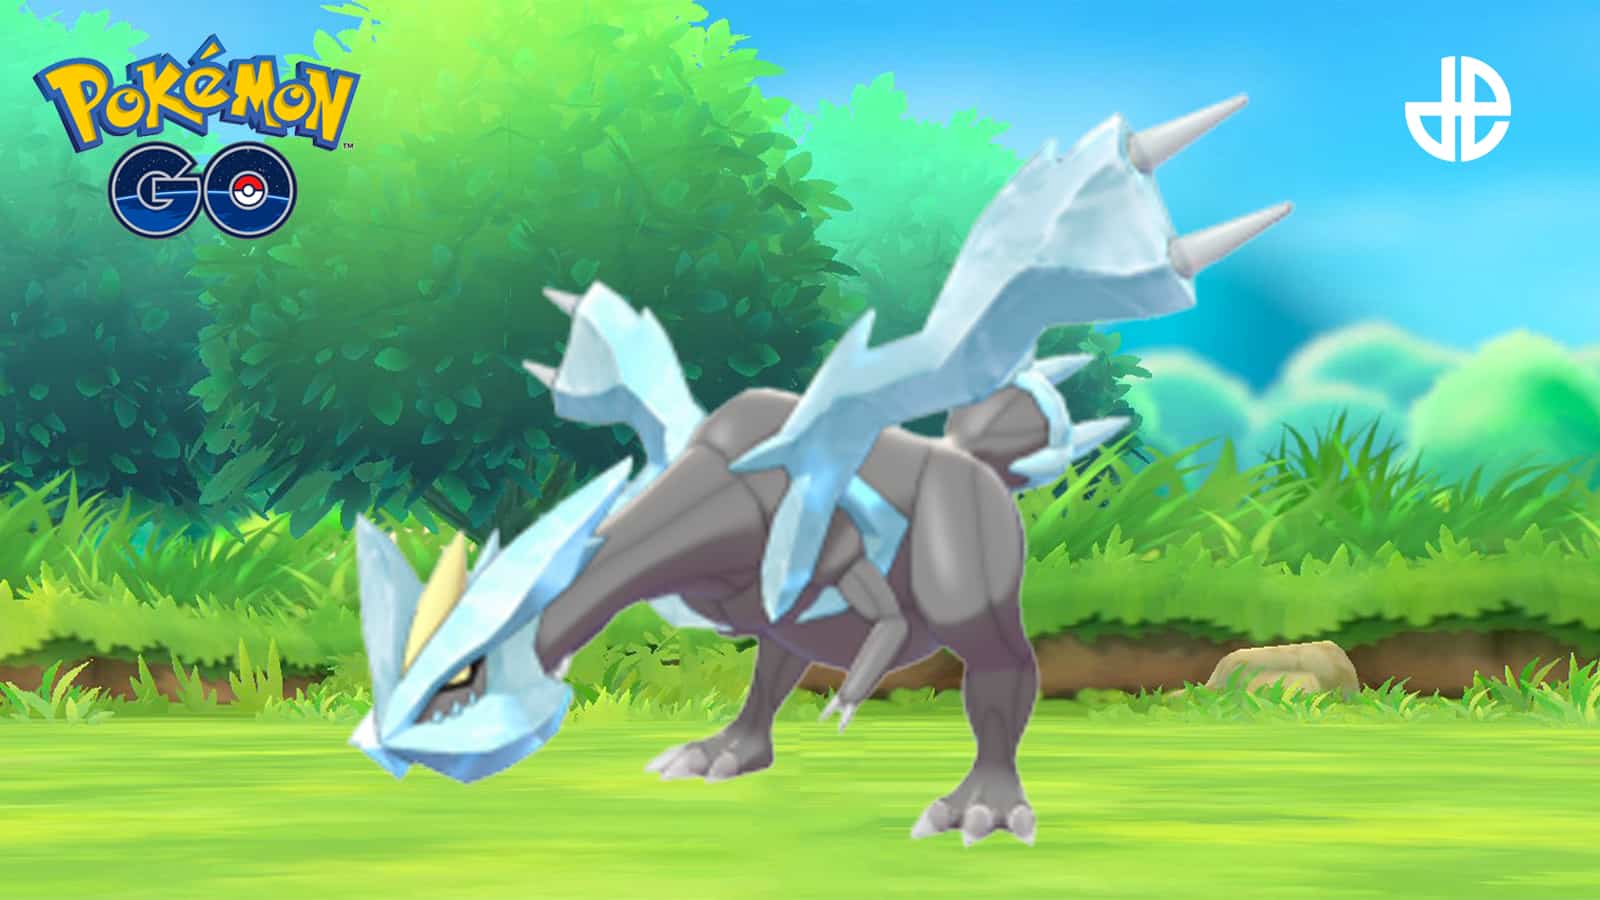 Kyurem appearing in Pokemon Go's 5-Star Raid Battles with the best counters for its weaknesses